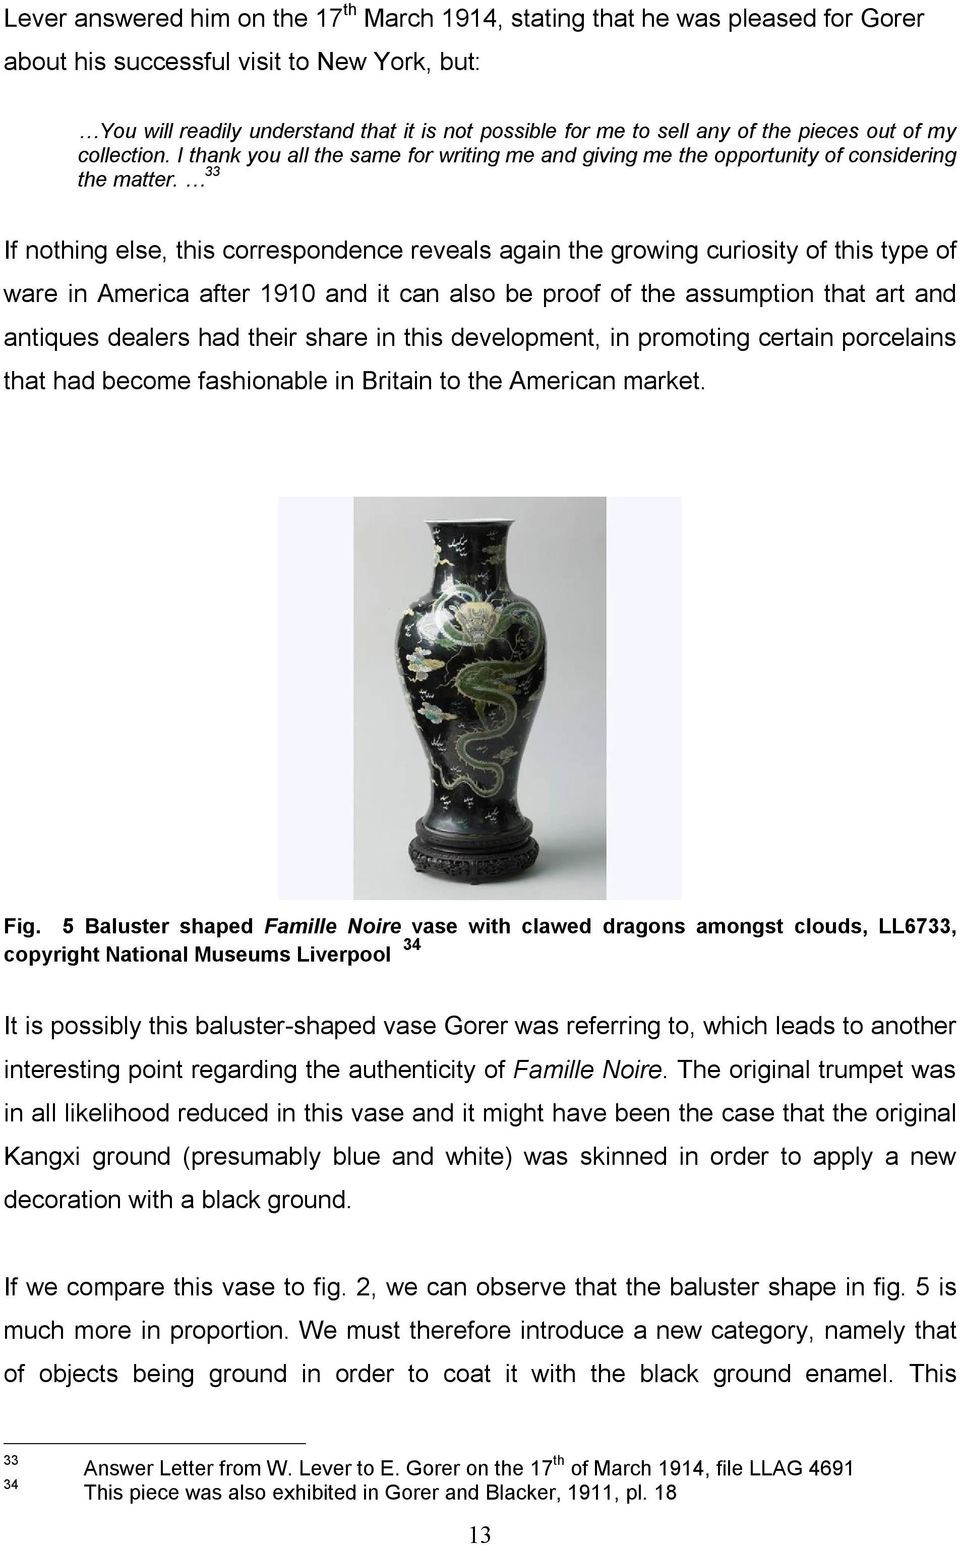 29 Fabulous Ginger Vases wholesale 2024 free download ginger vases wholesale of william lever s collecting of famille noire porcelain pdf throughout 33 if nothing else this correspondence reveals again the growing curiosity of this type of